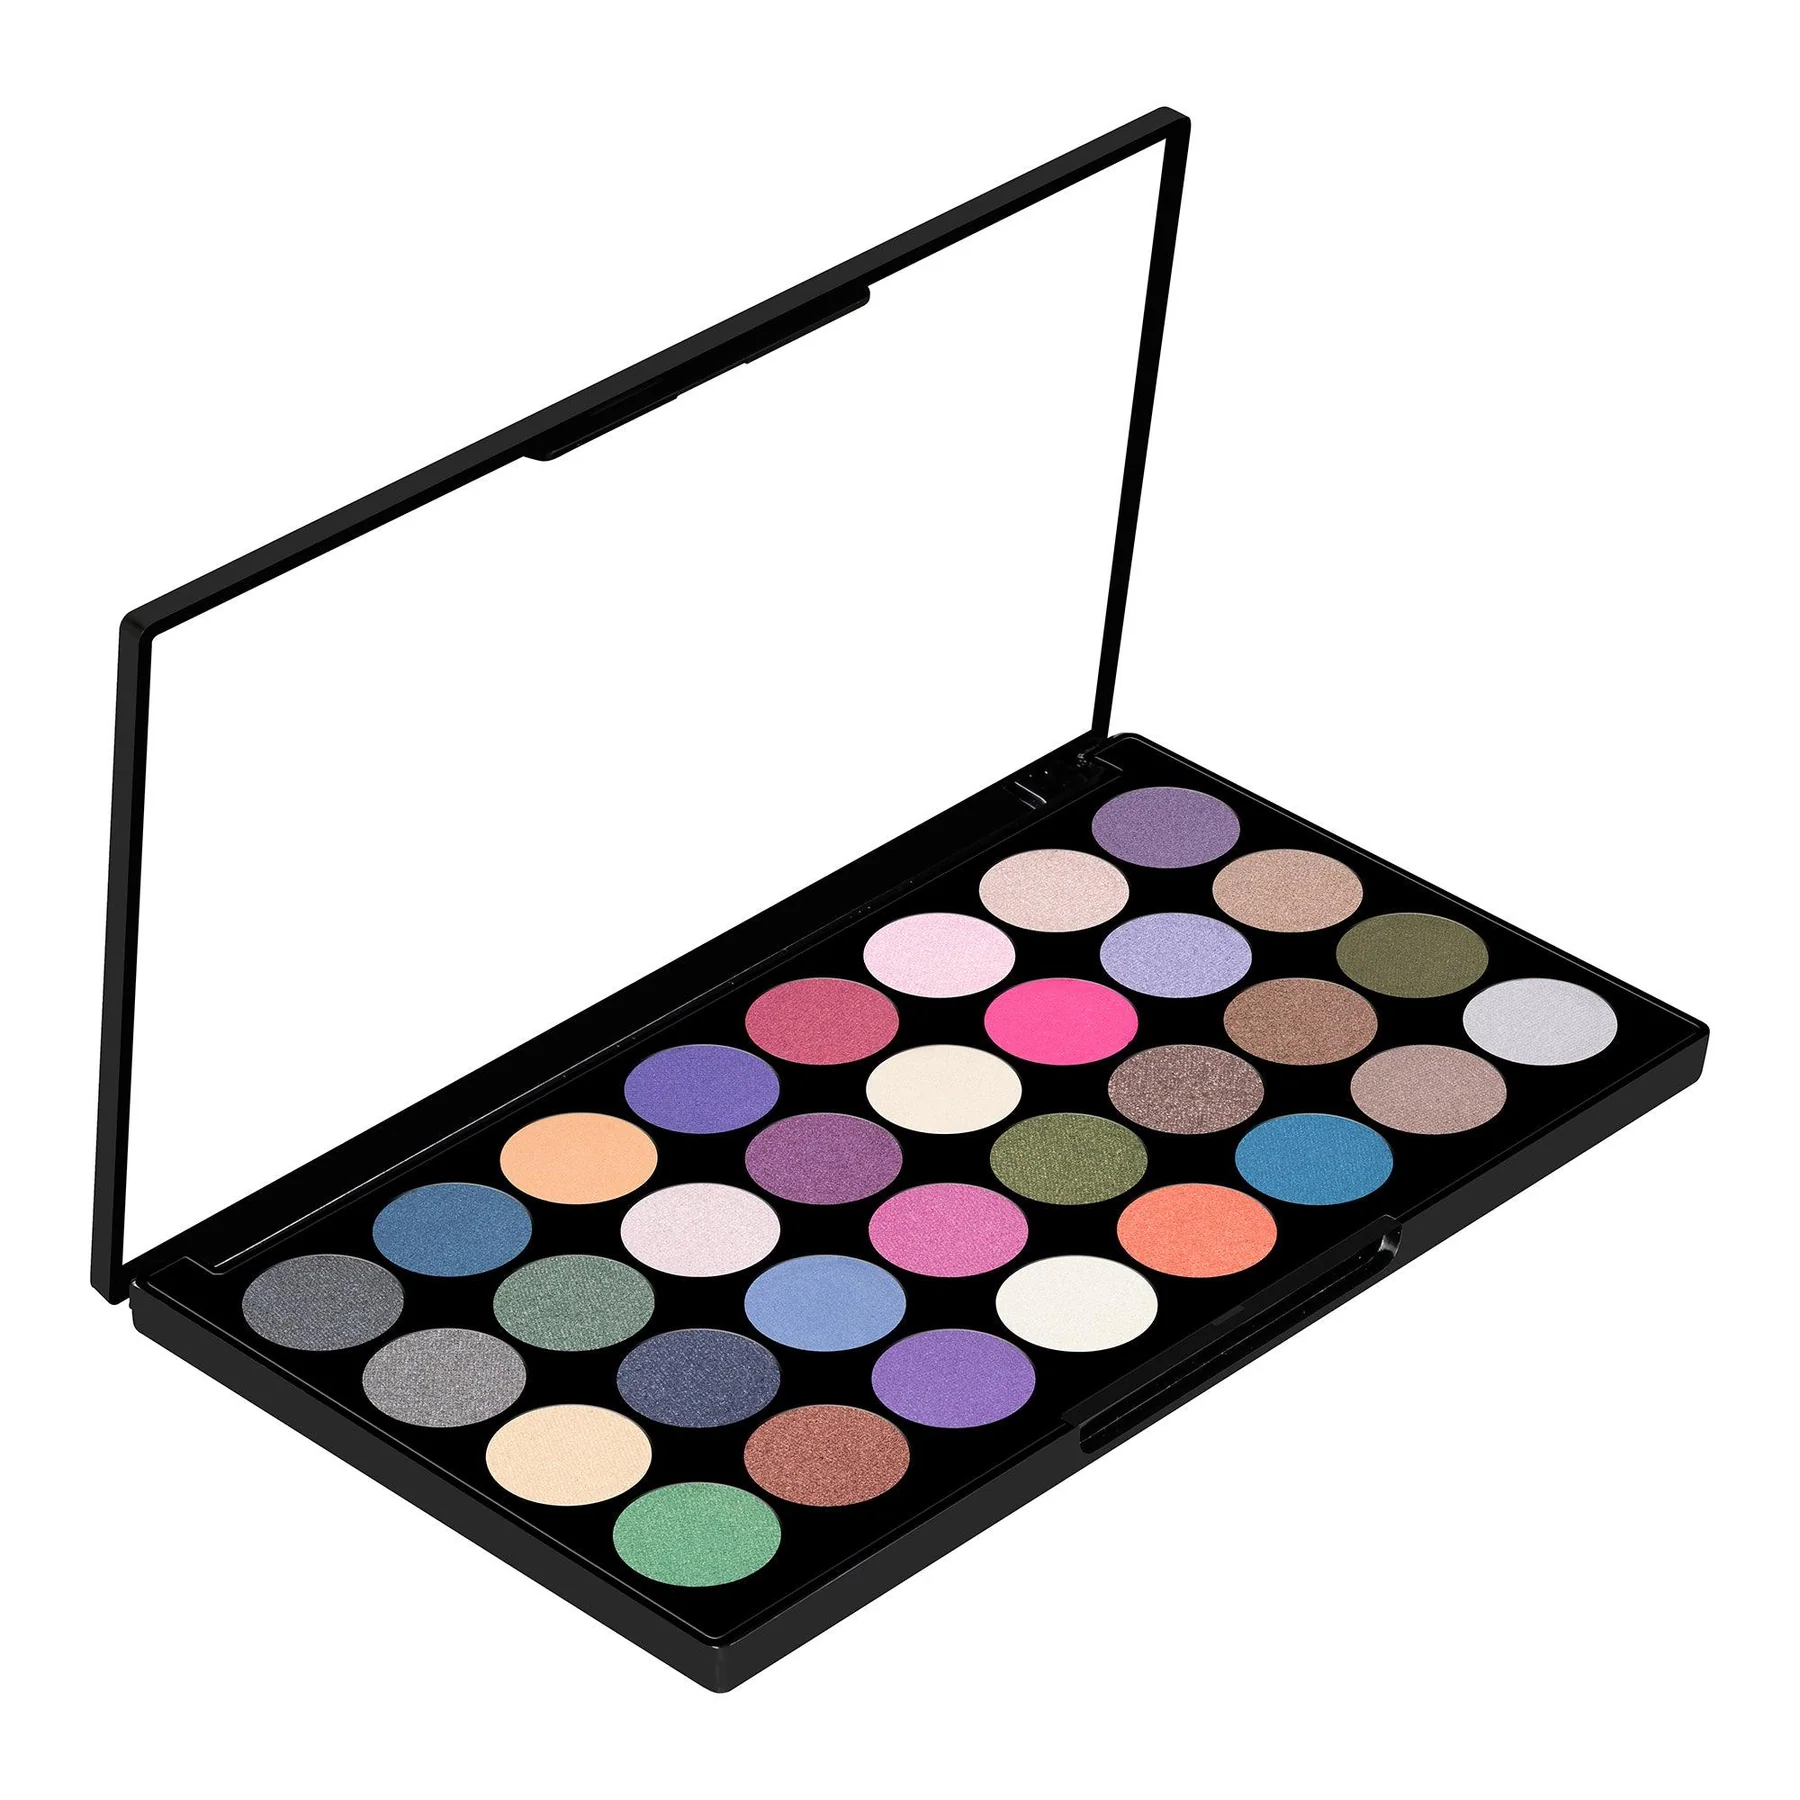 Swiss beauty 32 color forever eyeshadow palette